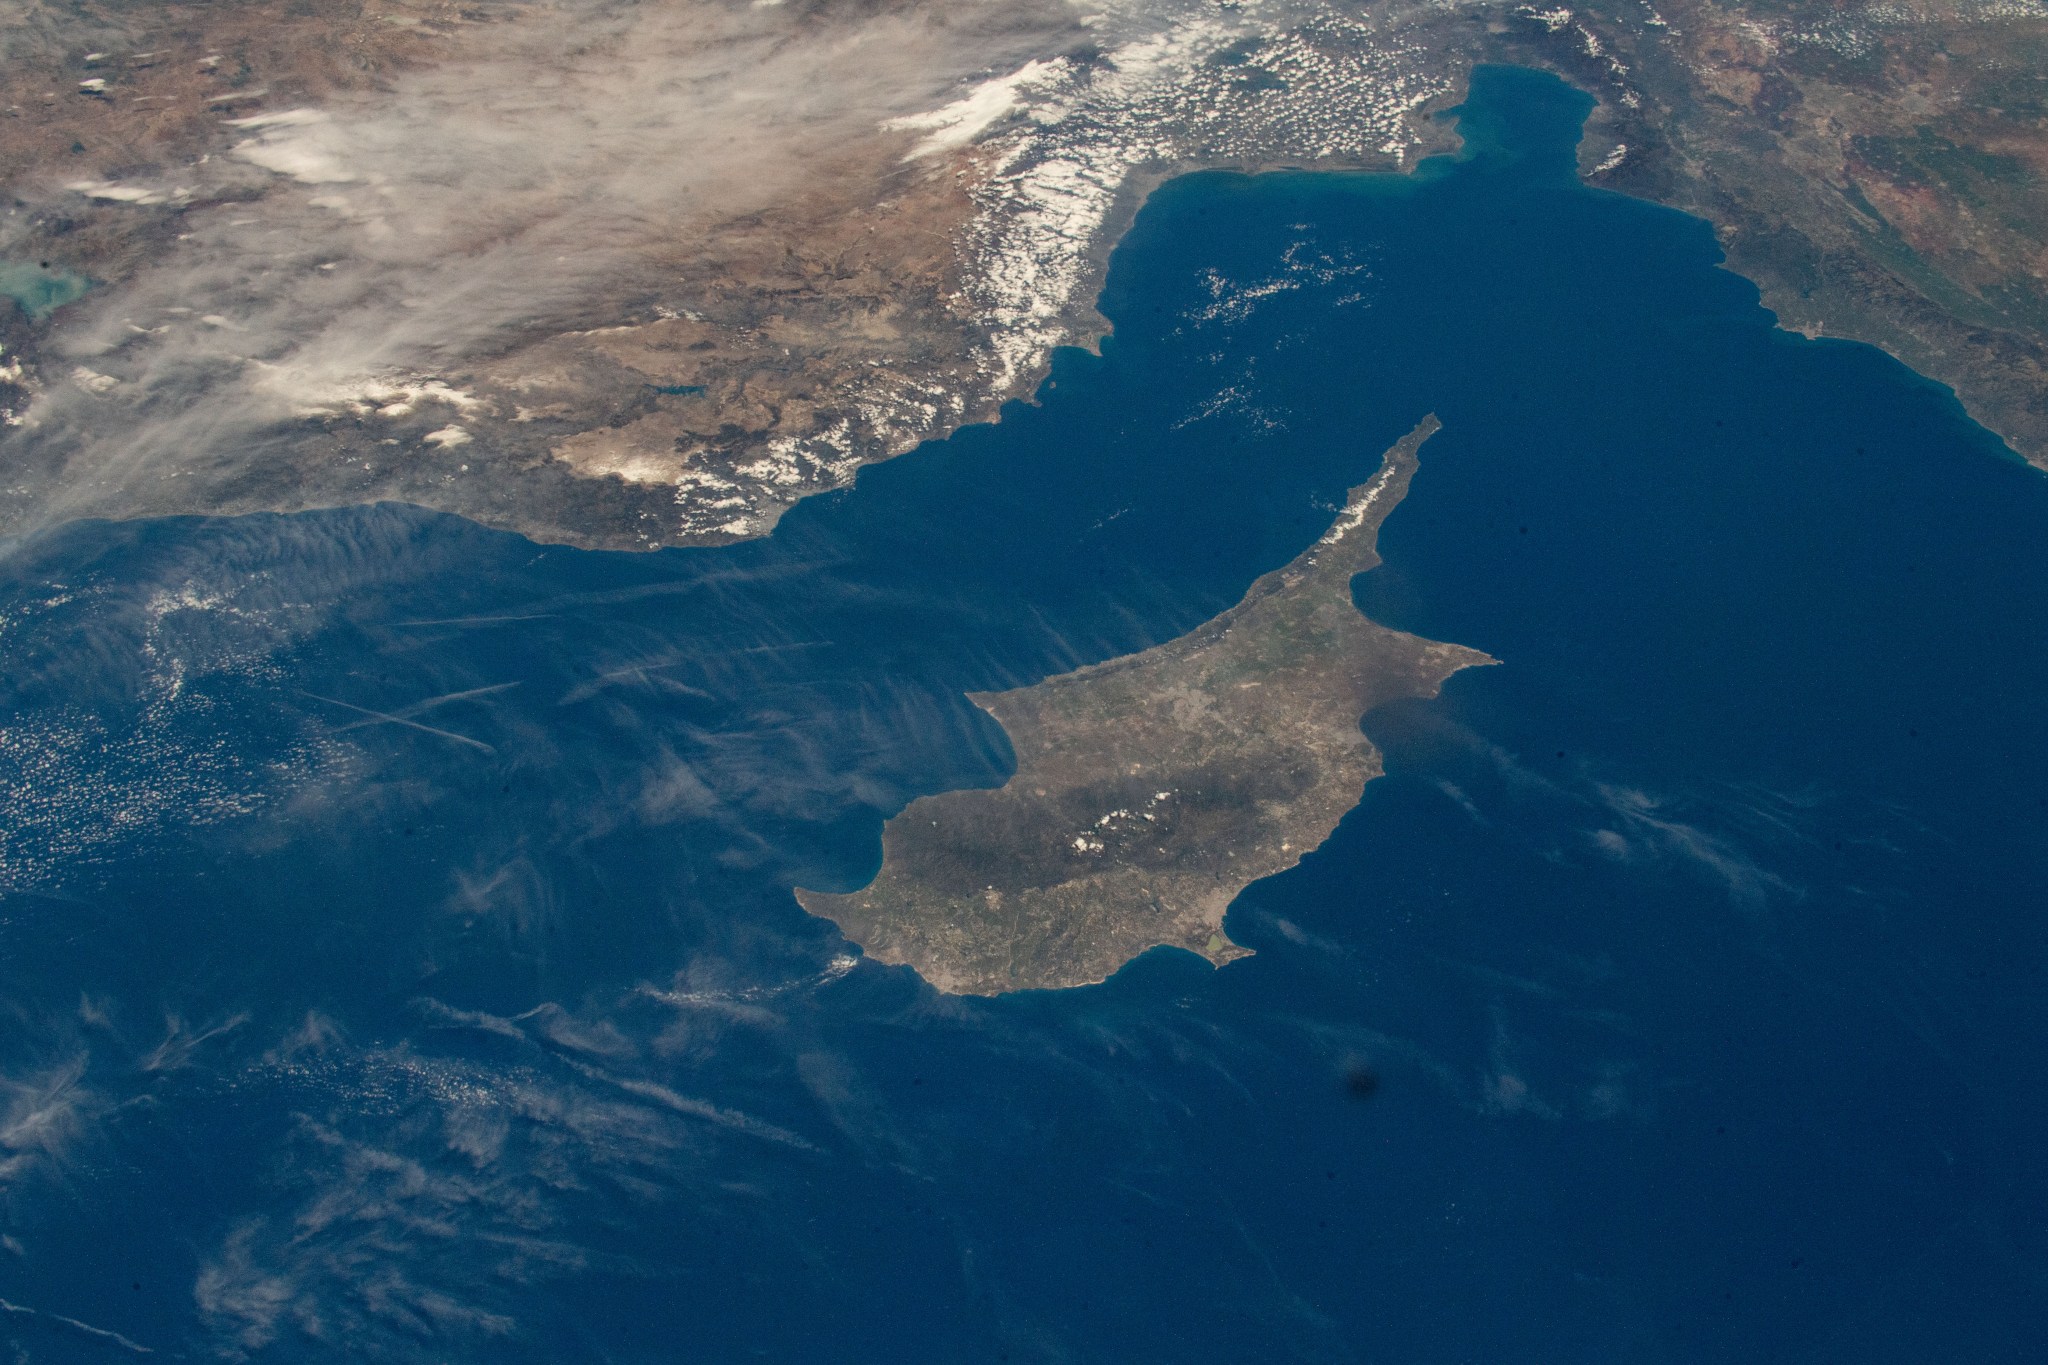 The Turkish coast and the island of Cyprus in the Mediterranean Sea are visible in this image taken from the International Space Station as it orbits 262 miles above.